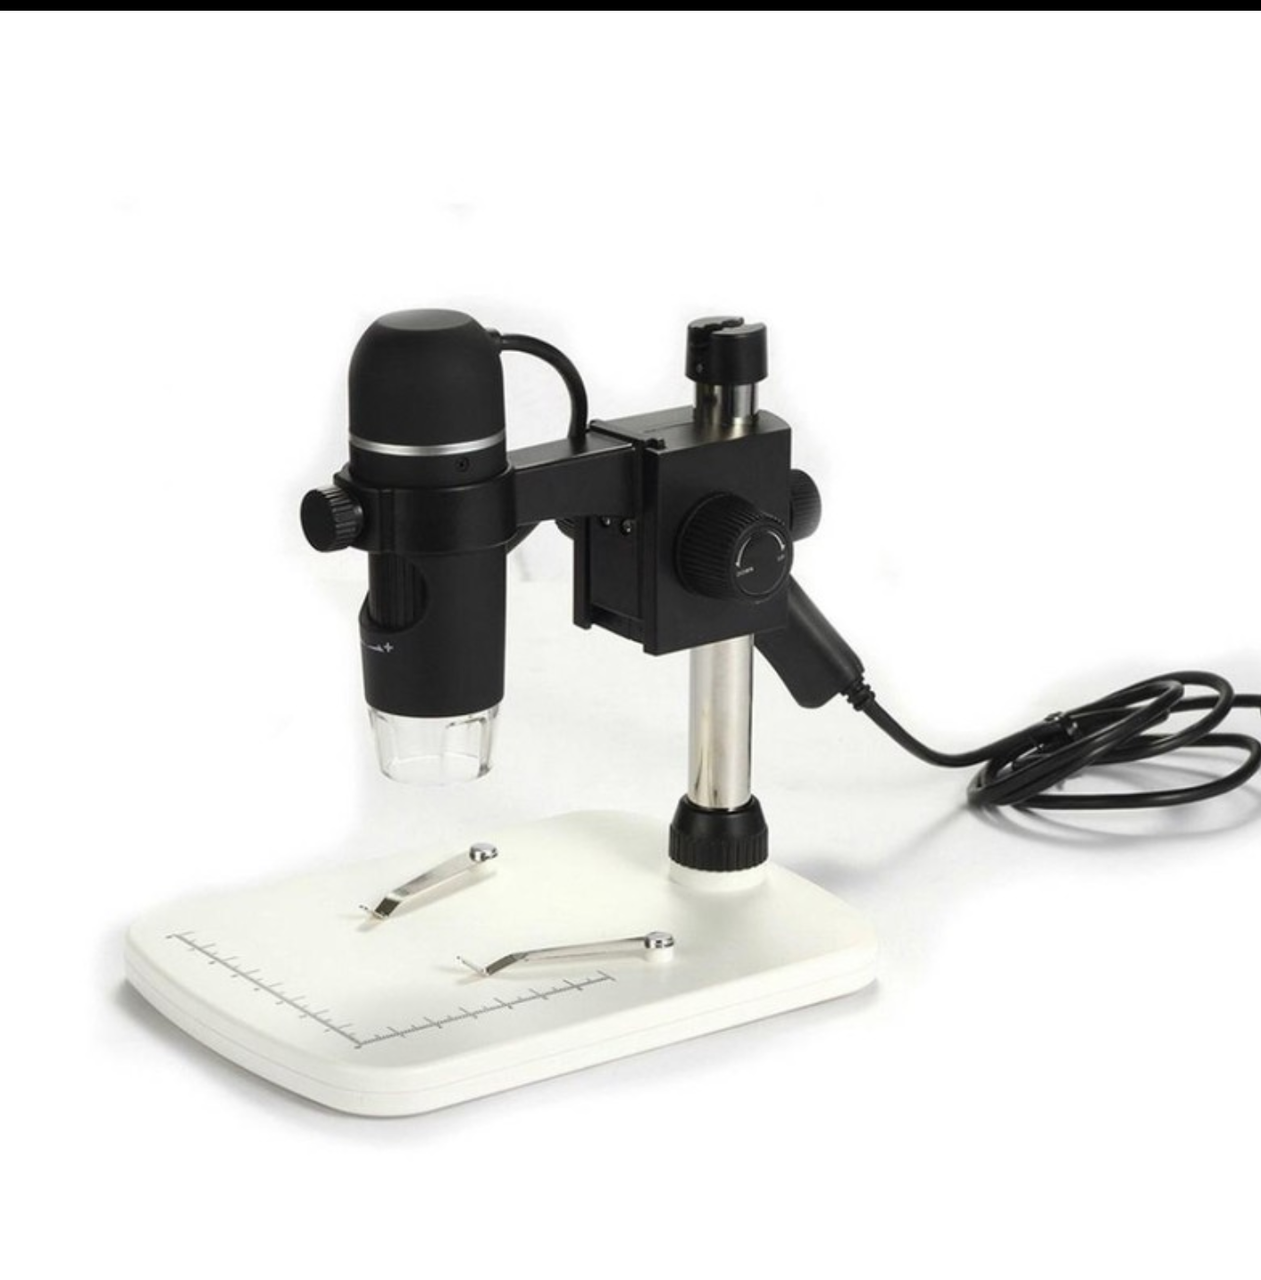 Digital Microscope Magnifier 20X 300X Video and Camera (SpLOrd-DigMicroMag)